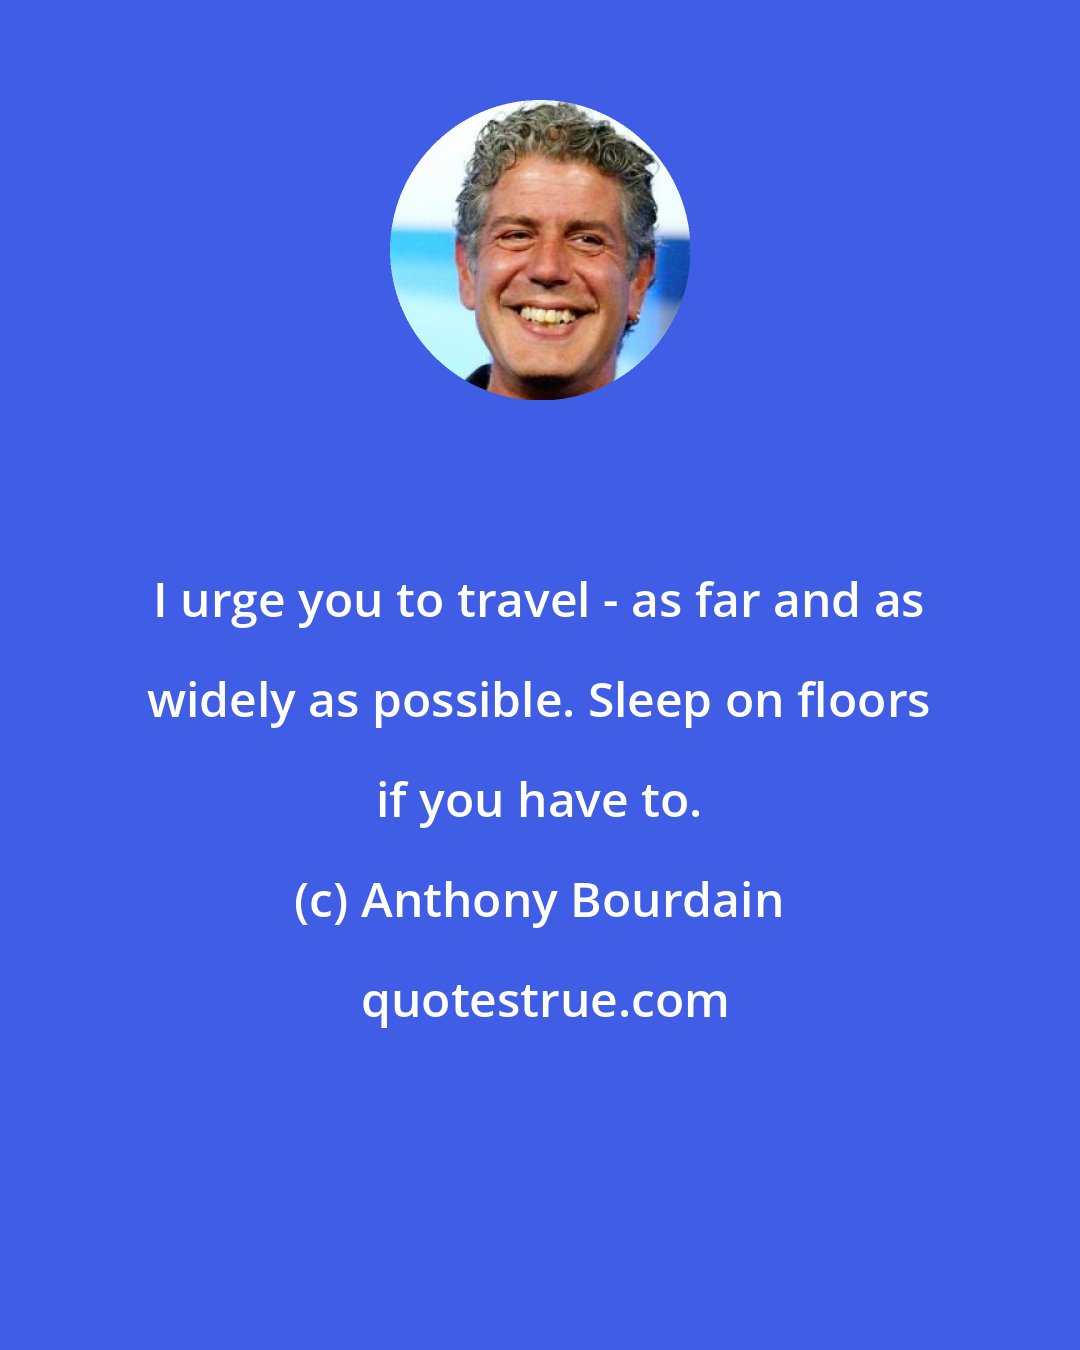 Anthony Bourdain: I urge you to travel - as far and as widely as possible. Sleep on floors if you have to.